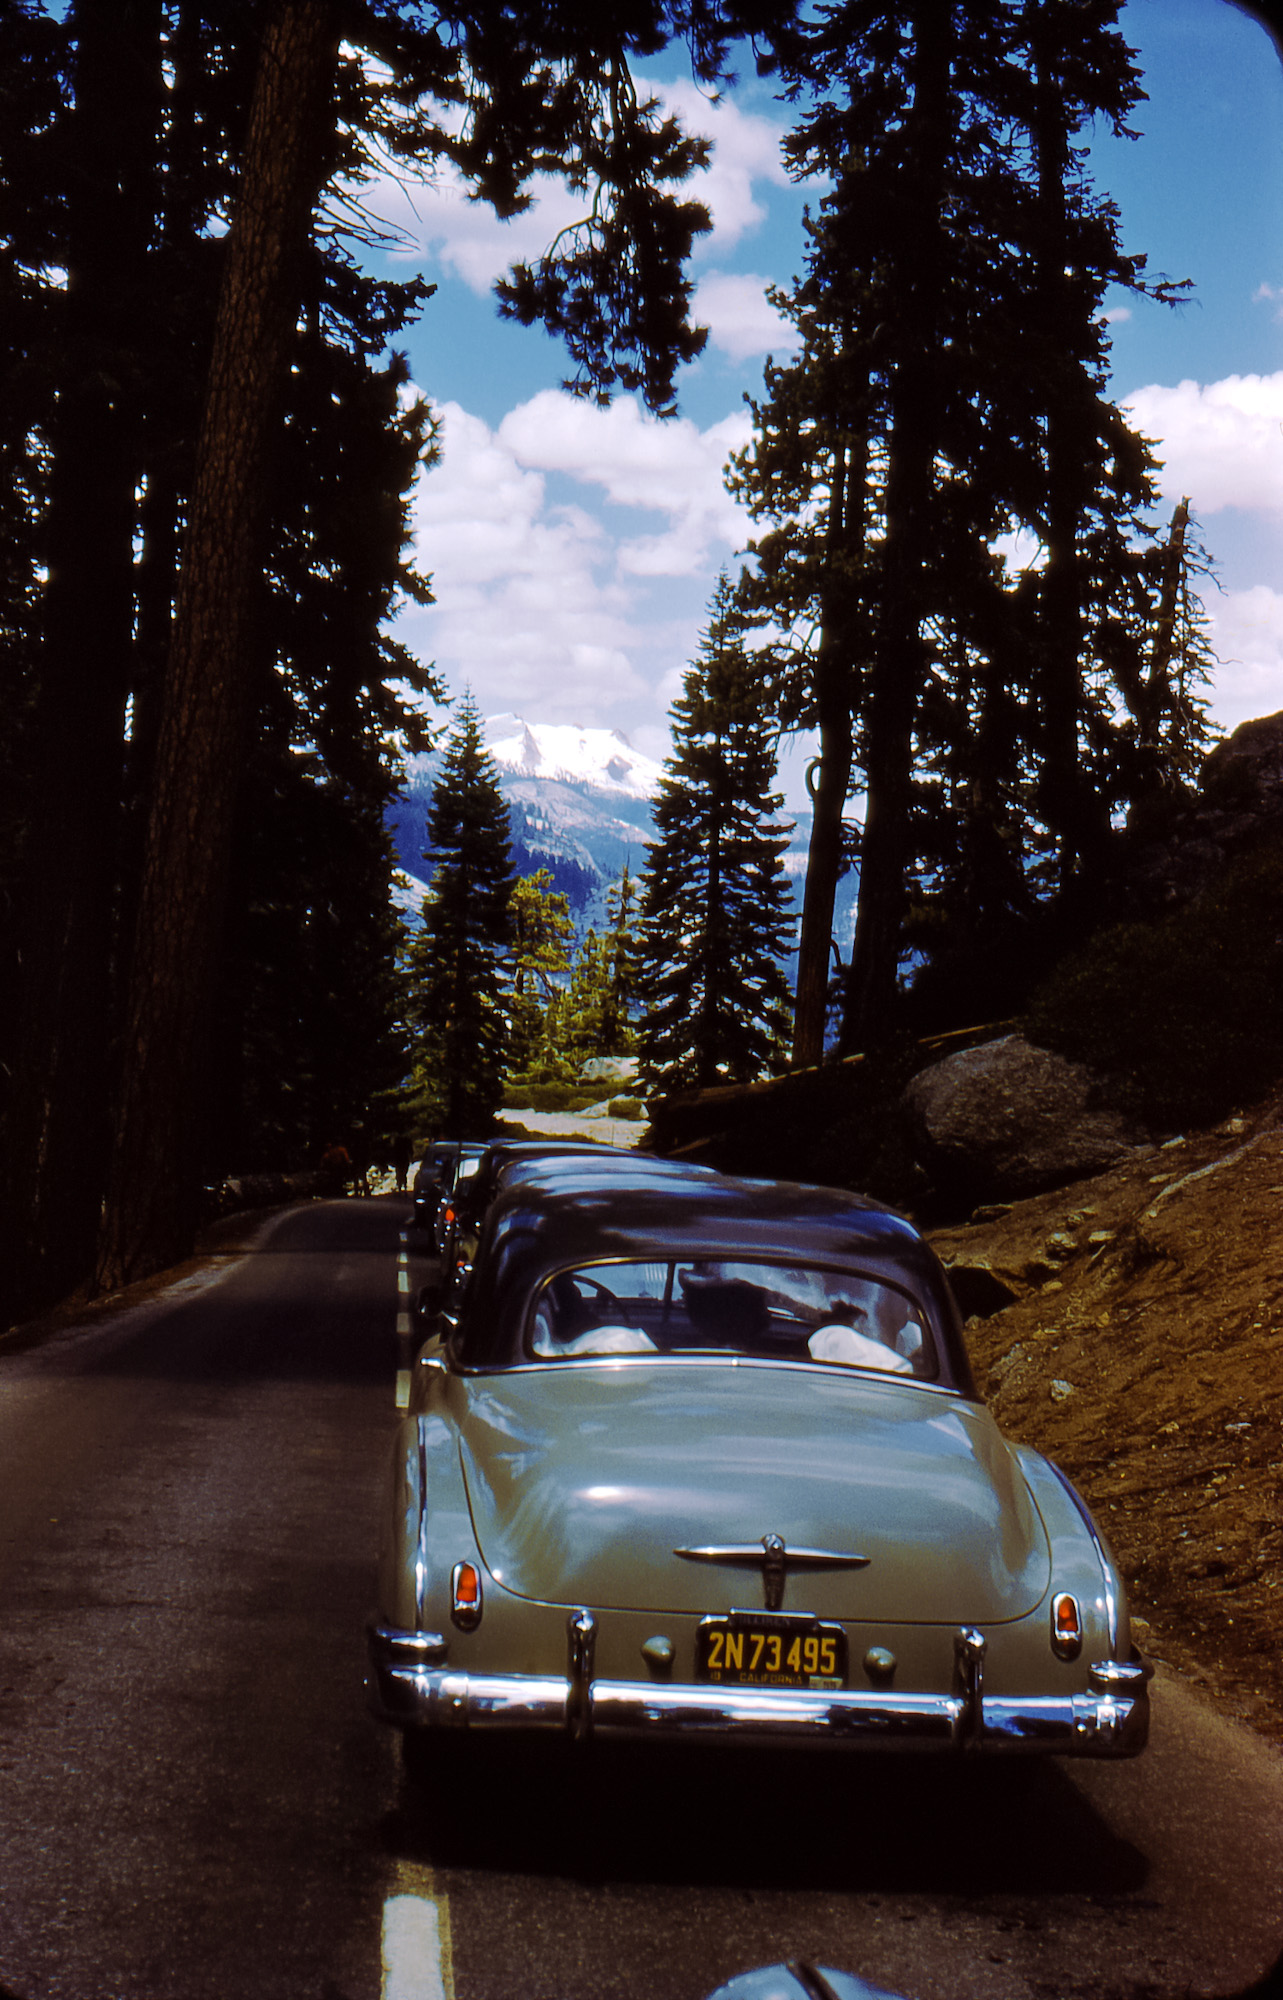 Yosemite park in what I'm assuming is 1954 based on the '55 license plate sticker. It's funny thinking that the original intent of the photo was to capture the beauty of the park but all most people would look at today are the cars. Scanned from the Kodachrome slide. View full size